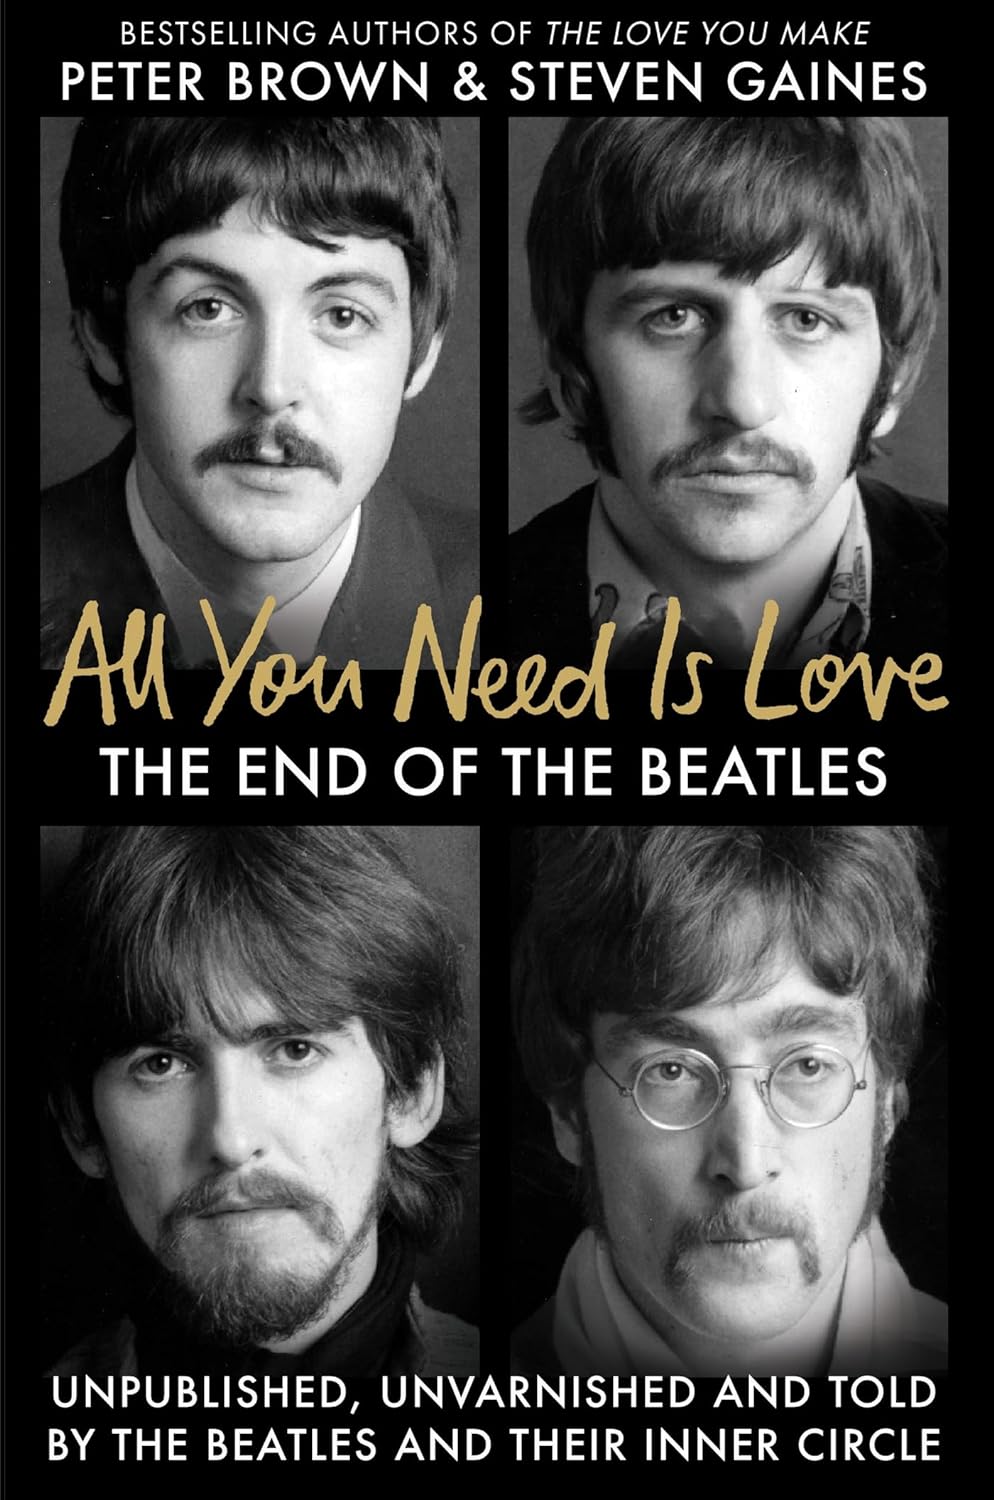 All_You_Need_Is_Love_The_end_of_the_beatles_book_cover.